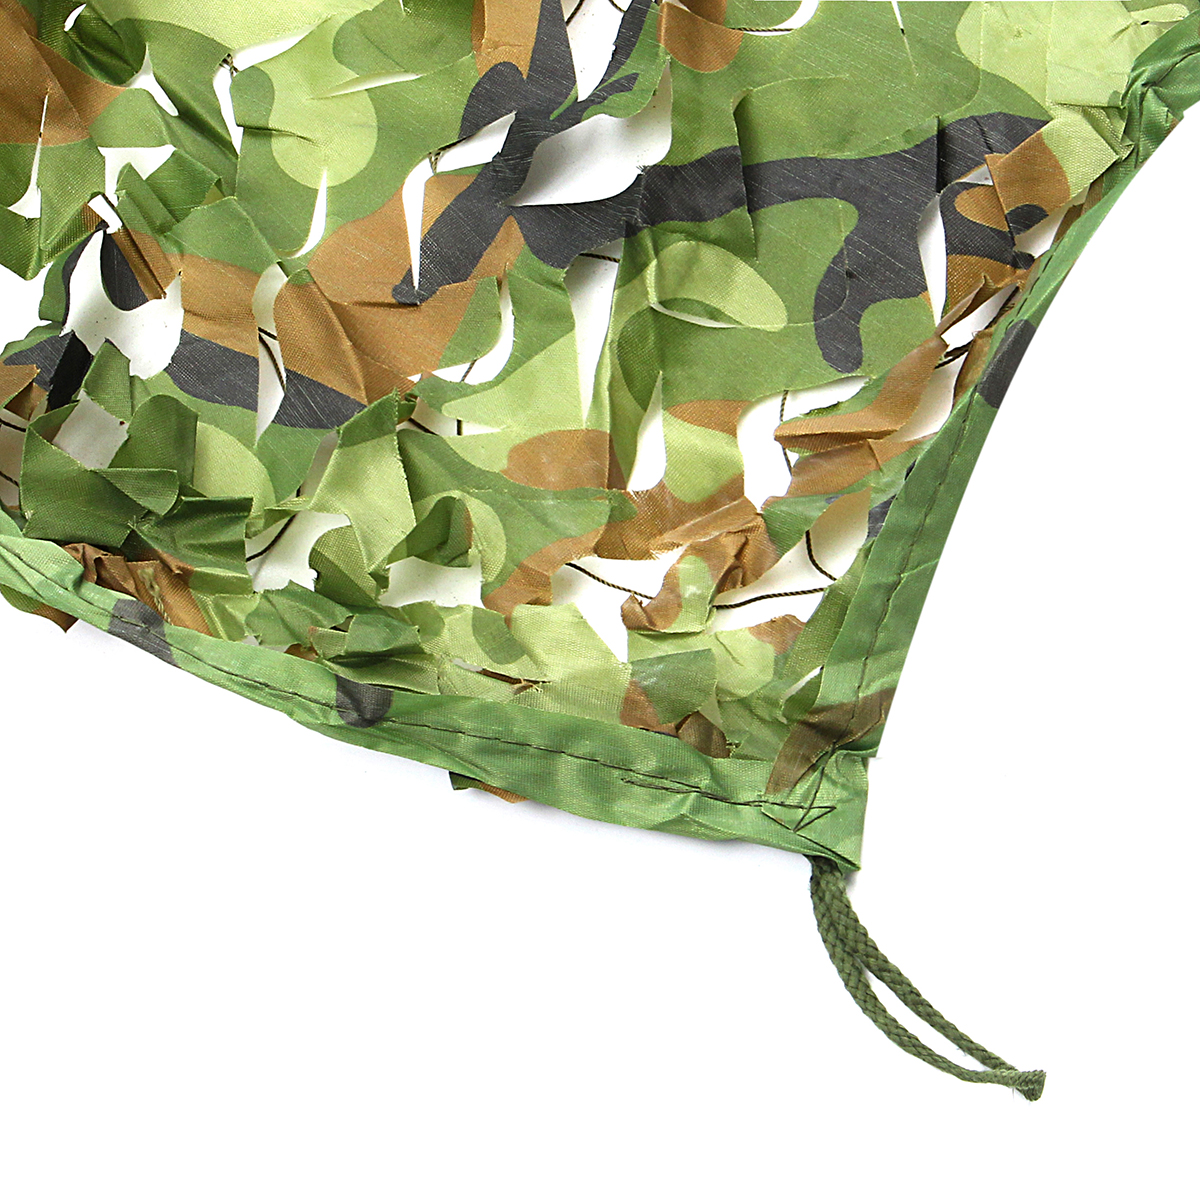 15mX6m-Jungle-Camo-Netting-Camouflage-Net-for-Car-Cover-Camping-Woodland-Military-Hunting-1358047